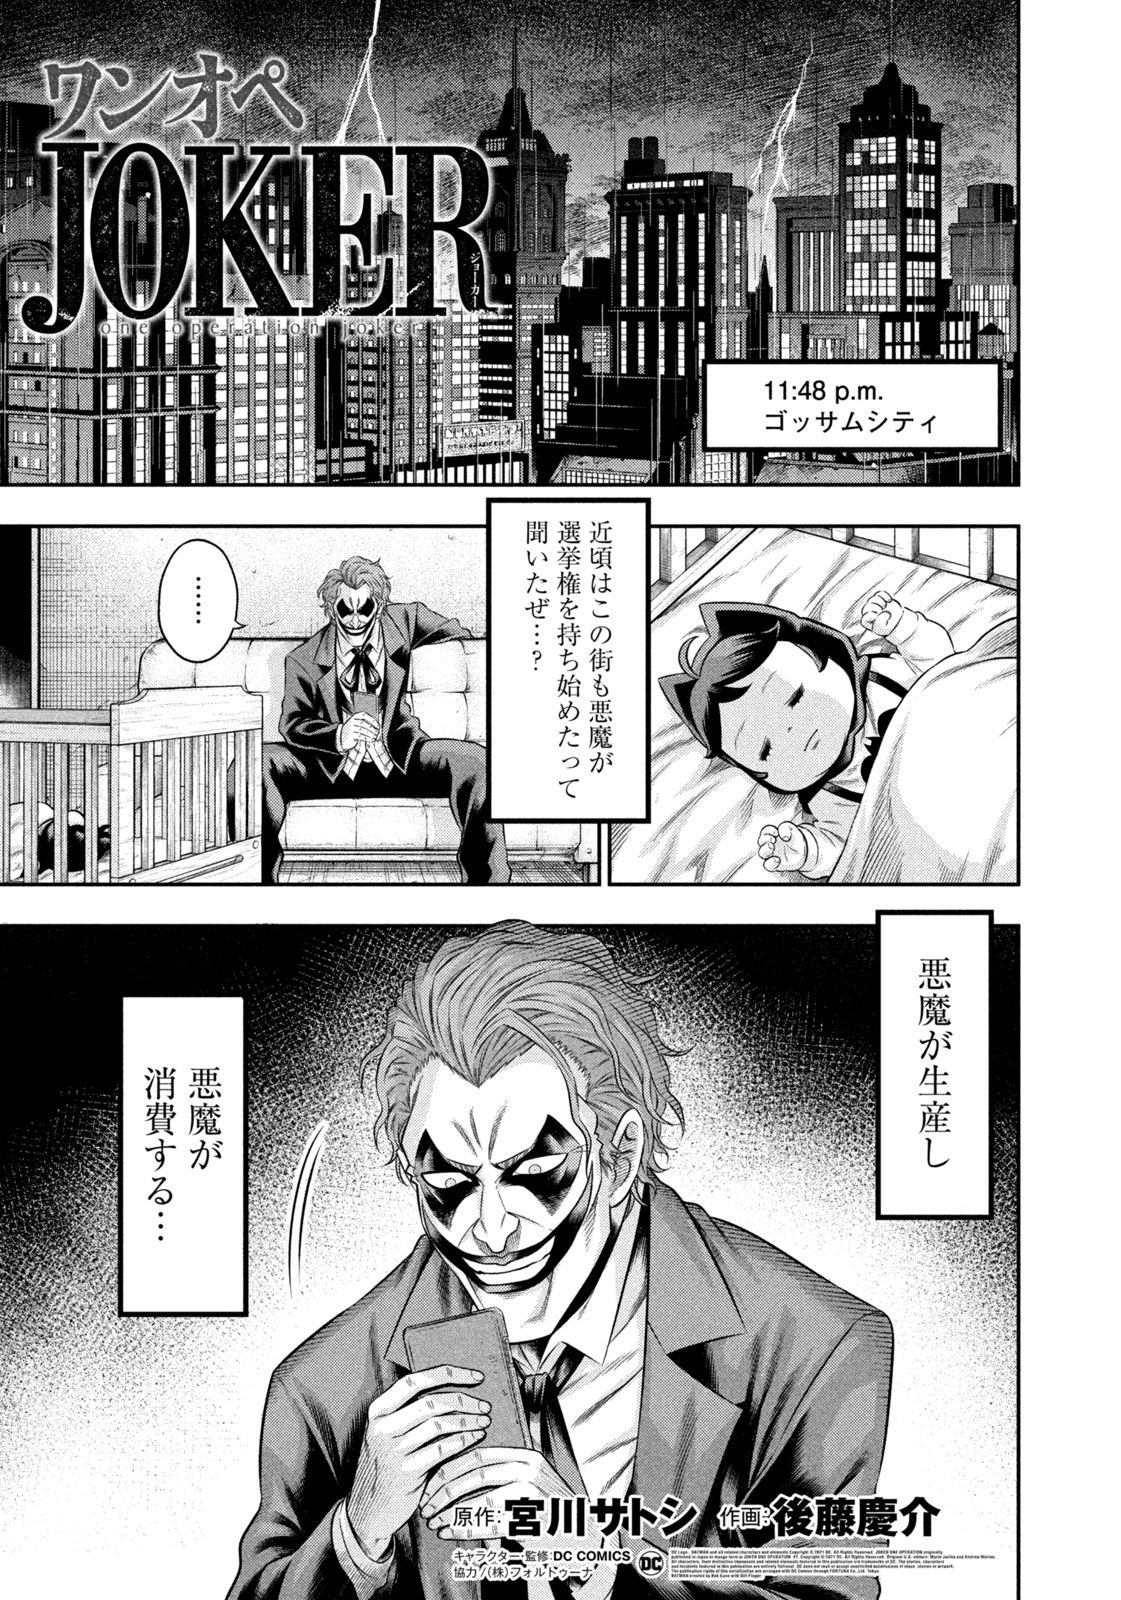 One Operation Joker - Chapter 81 - Page 1